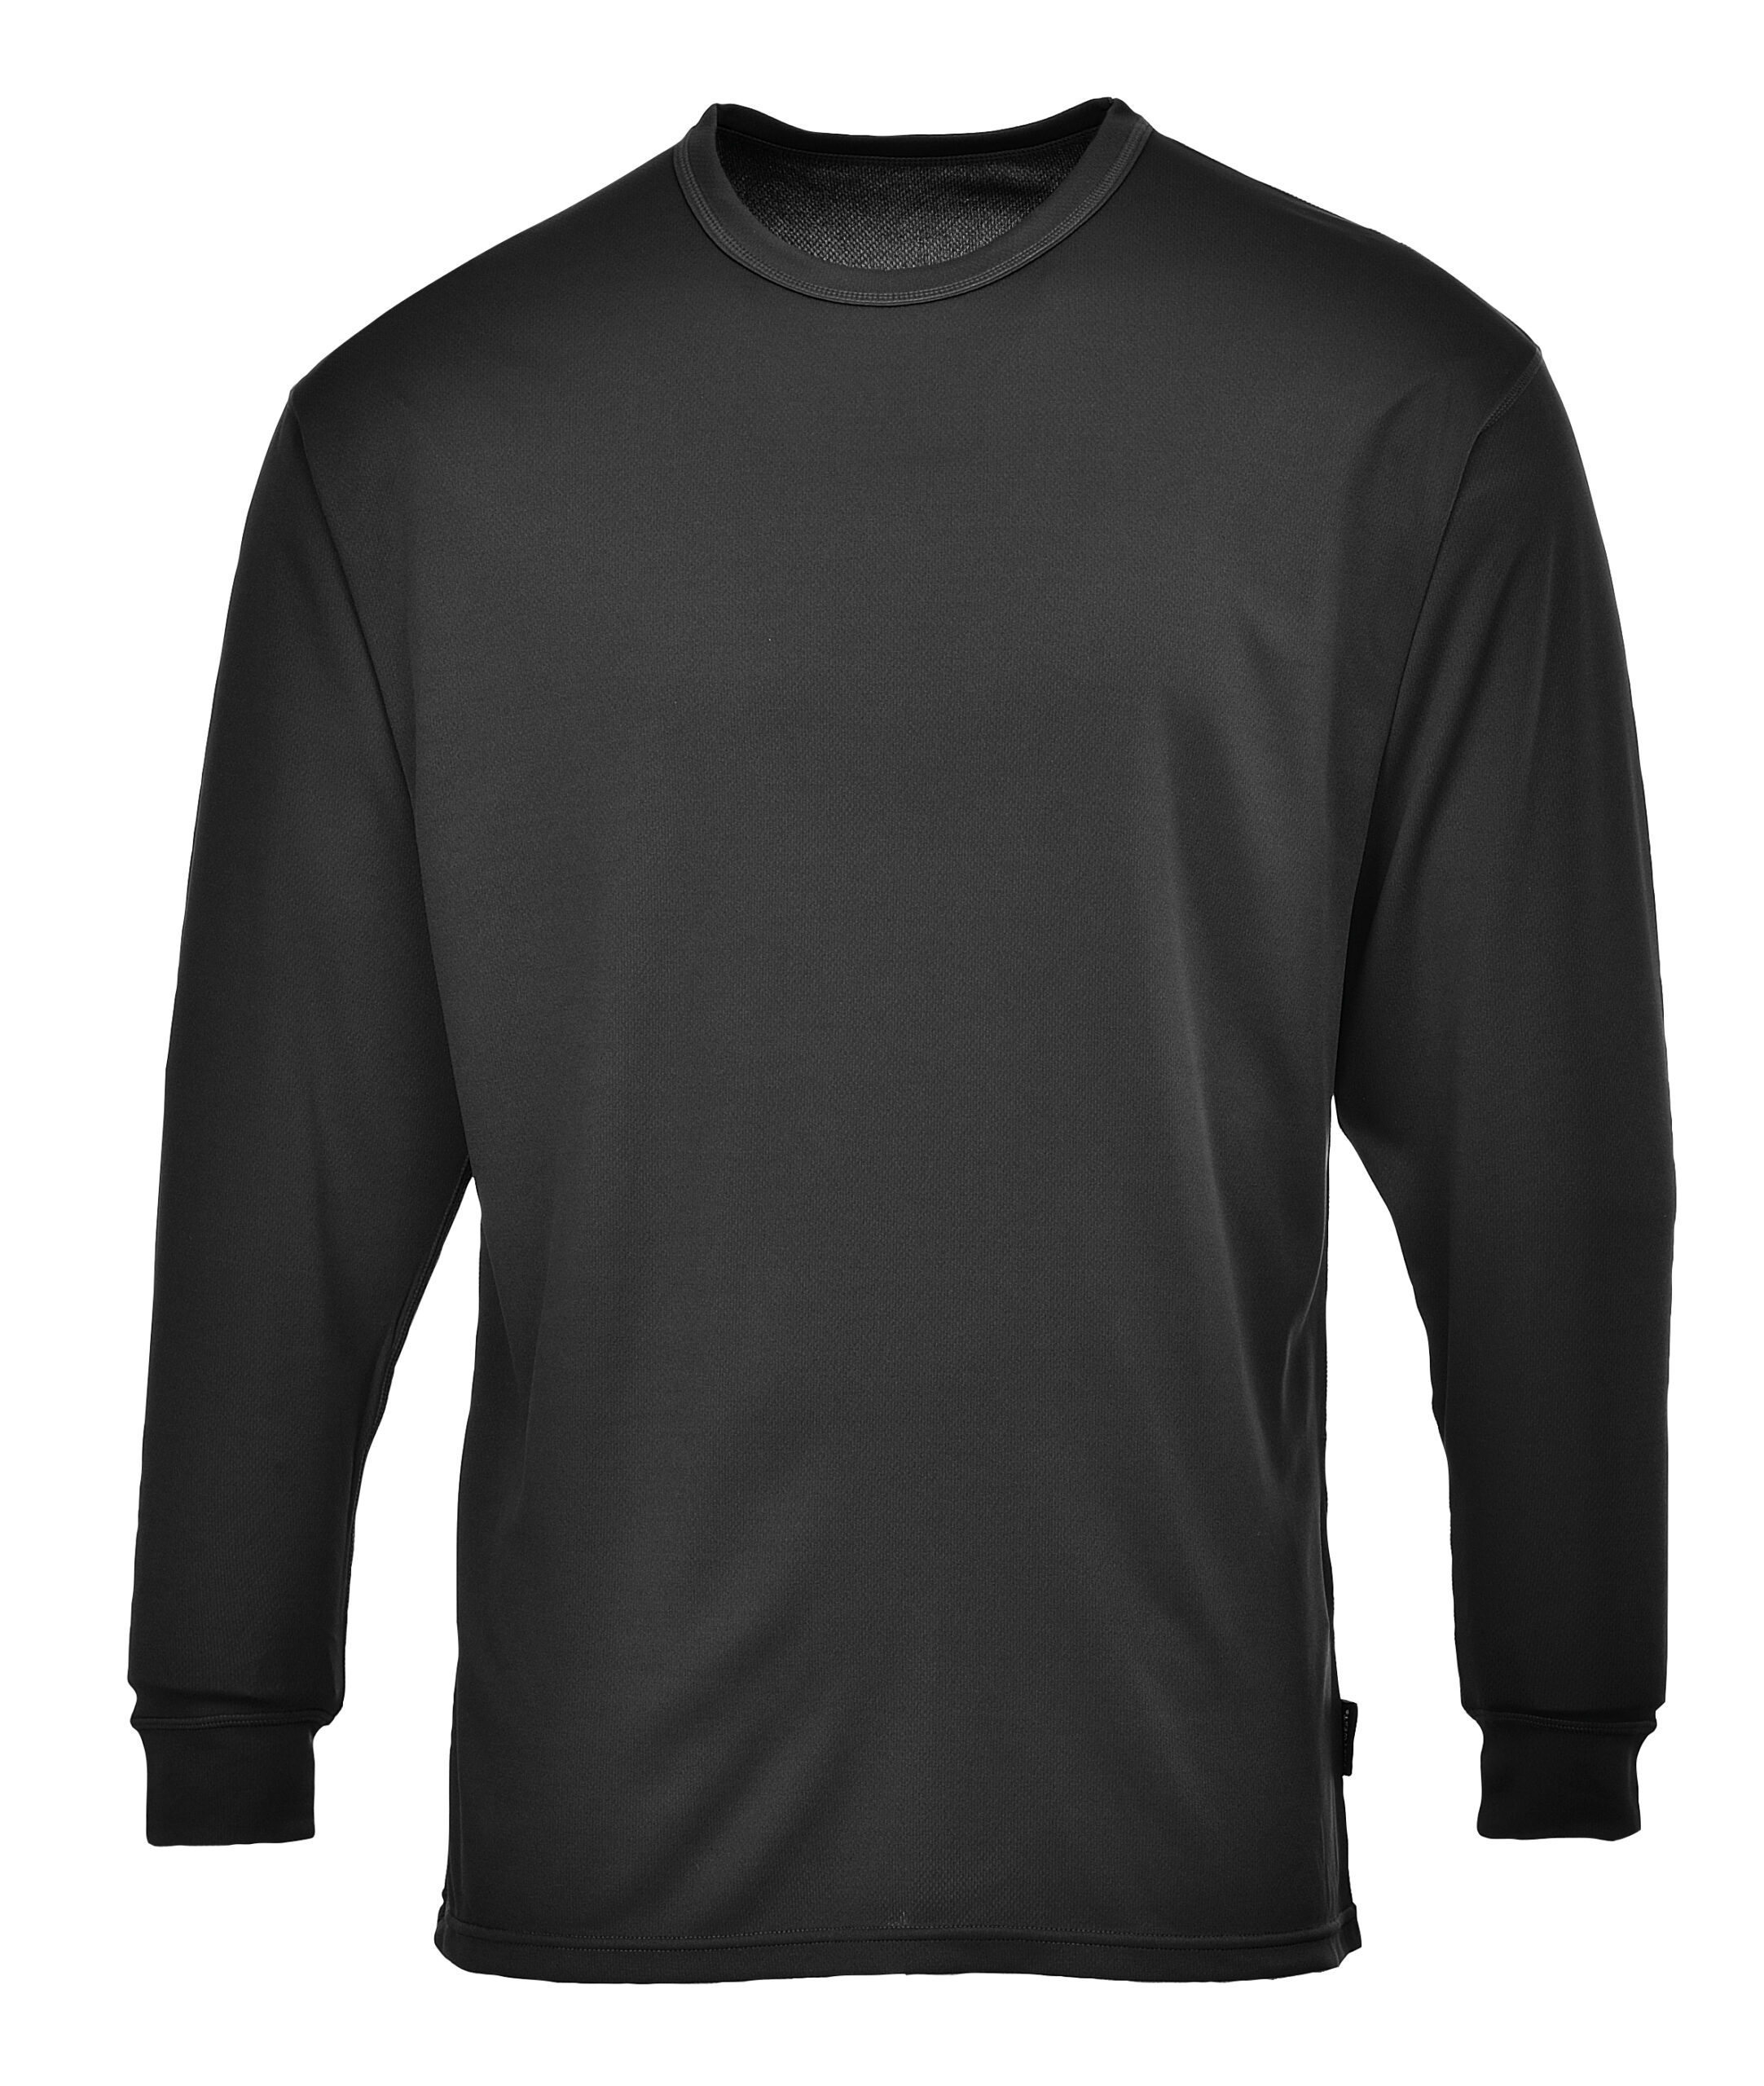 Portwest B133 Thermal Baselayer Top-0